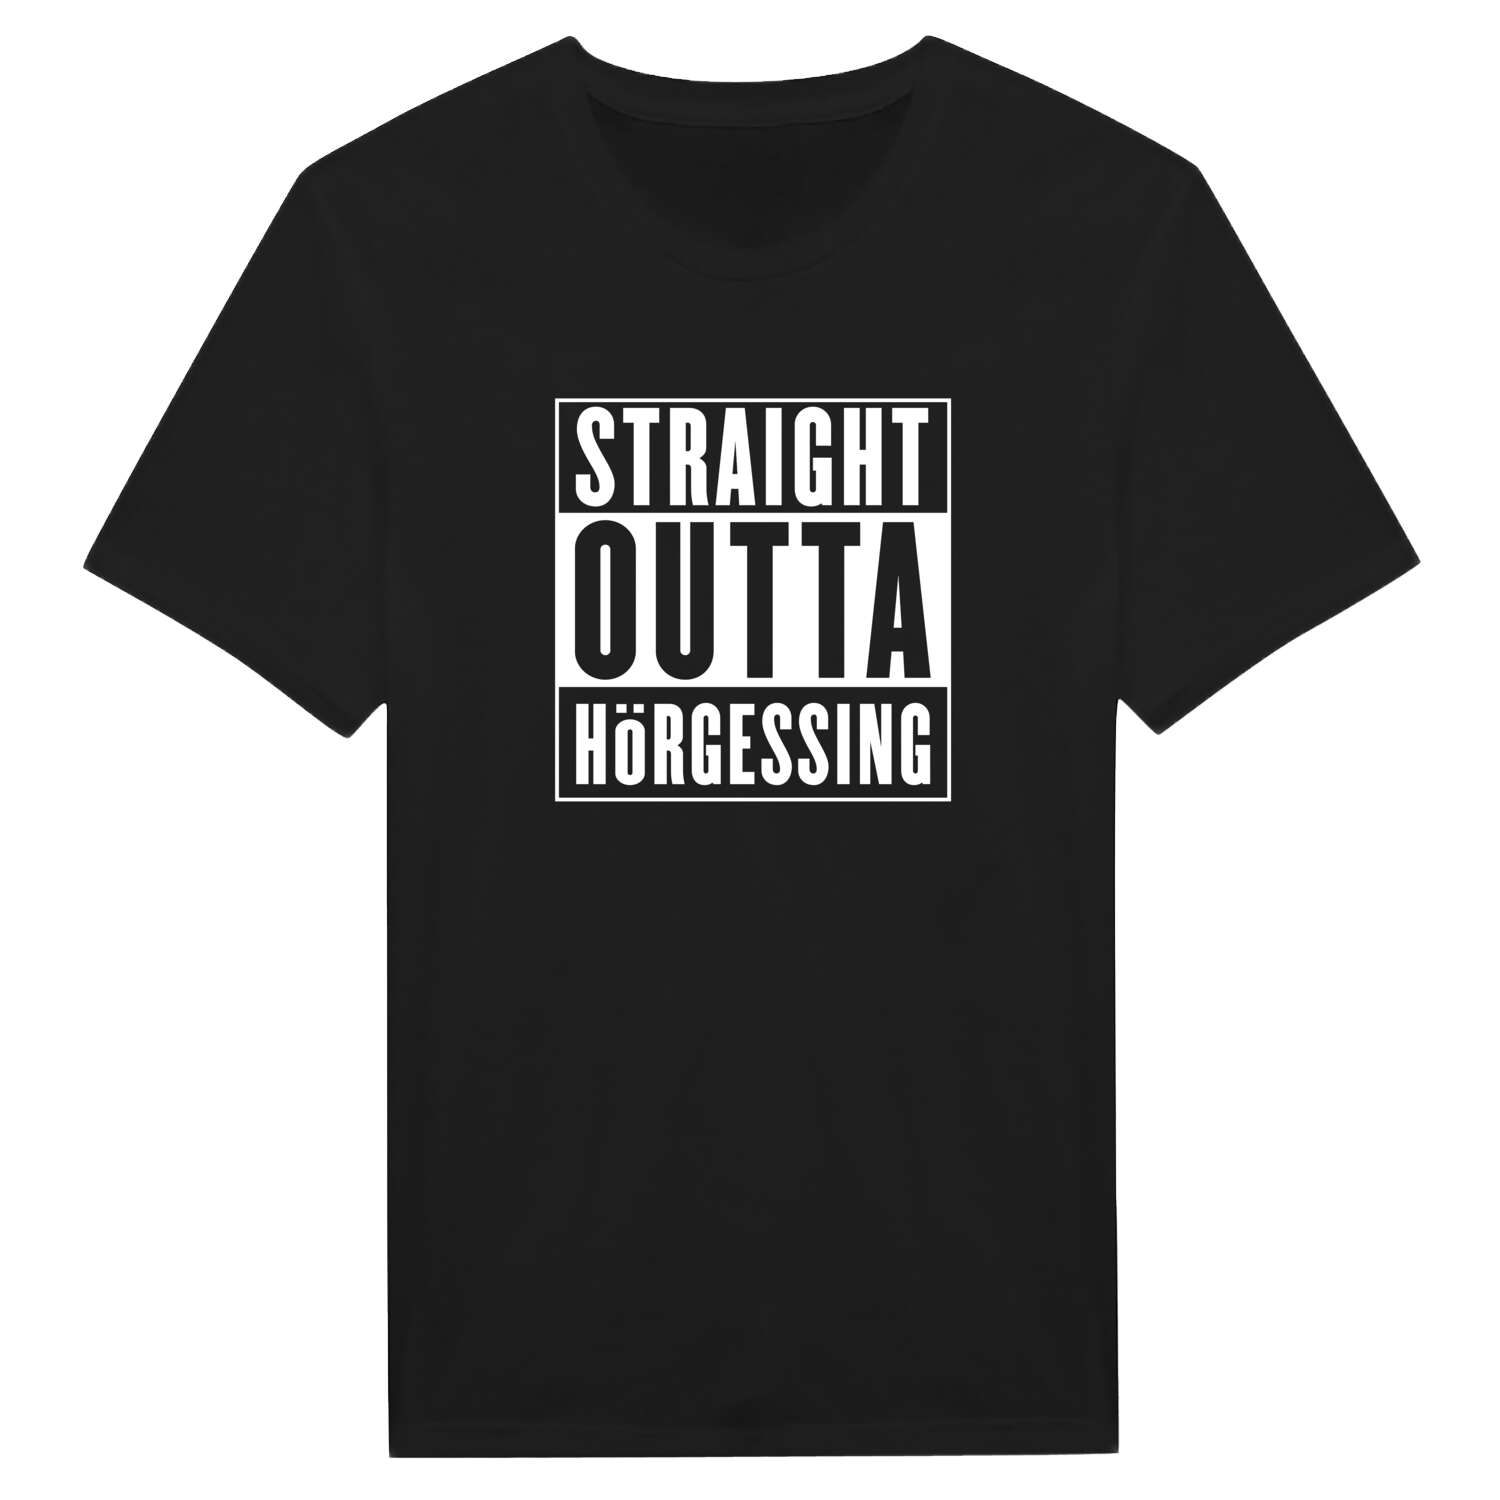 Hörgessing T-Shirt »Straight Outta«